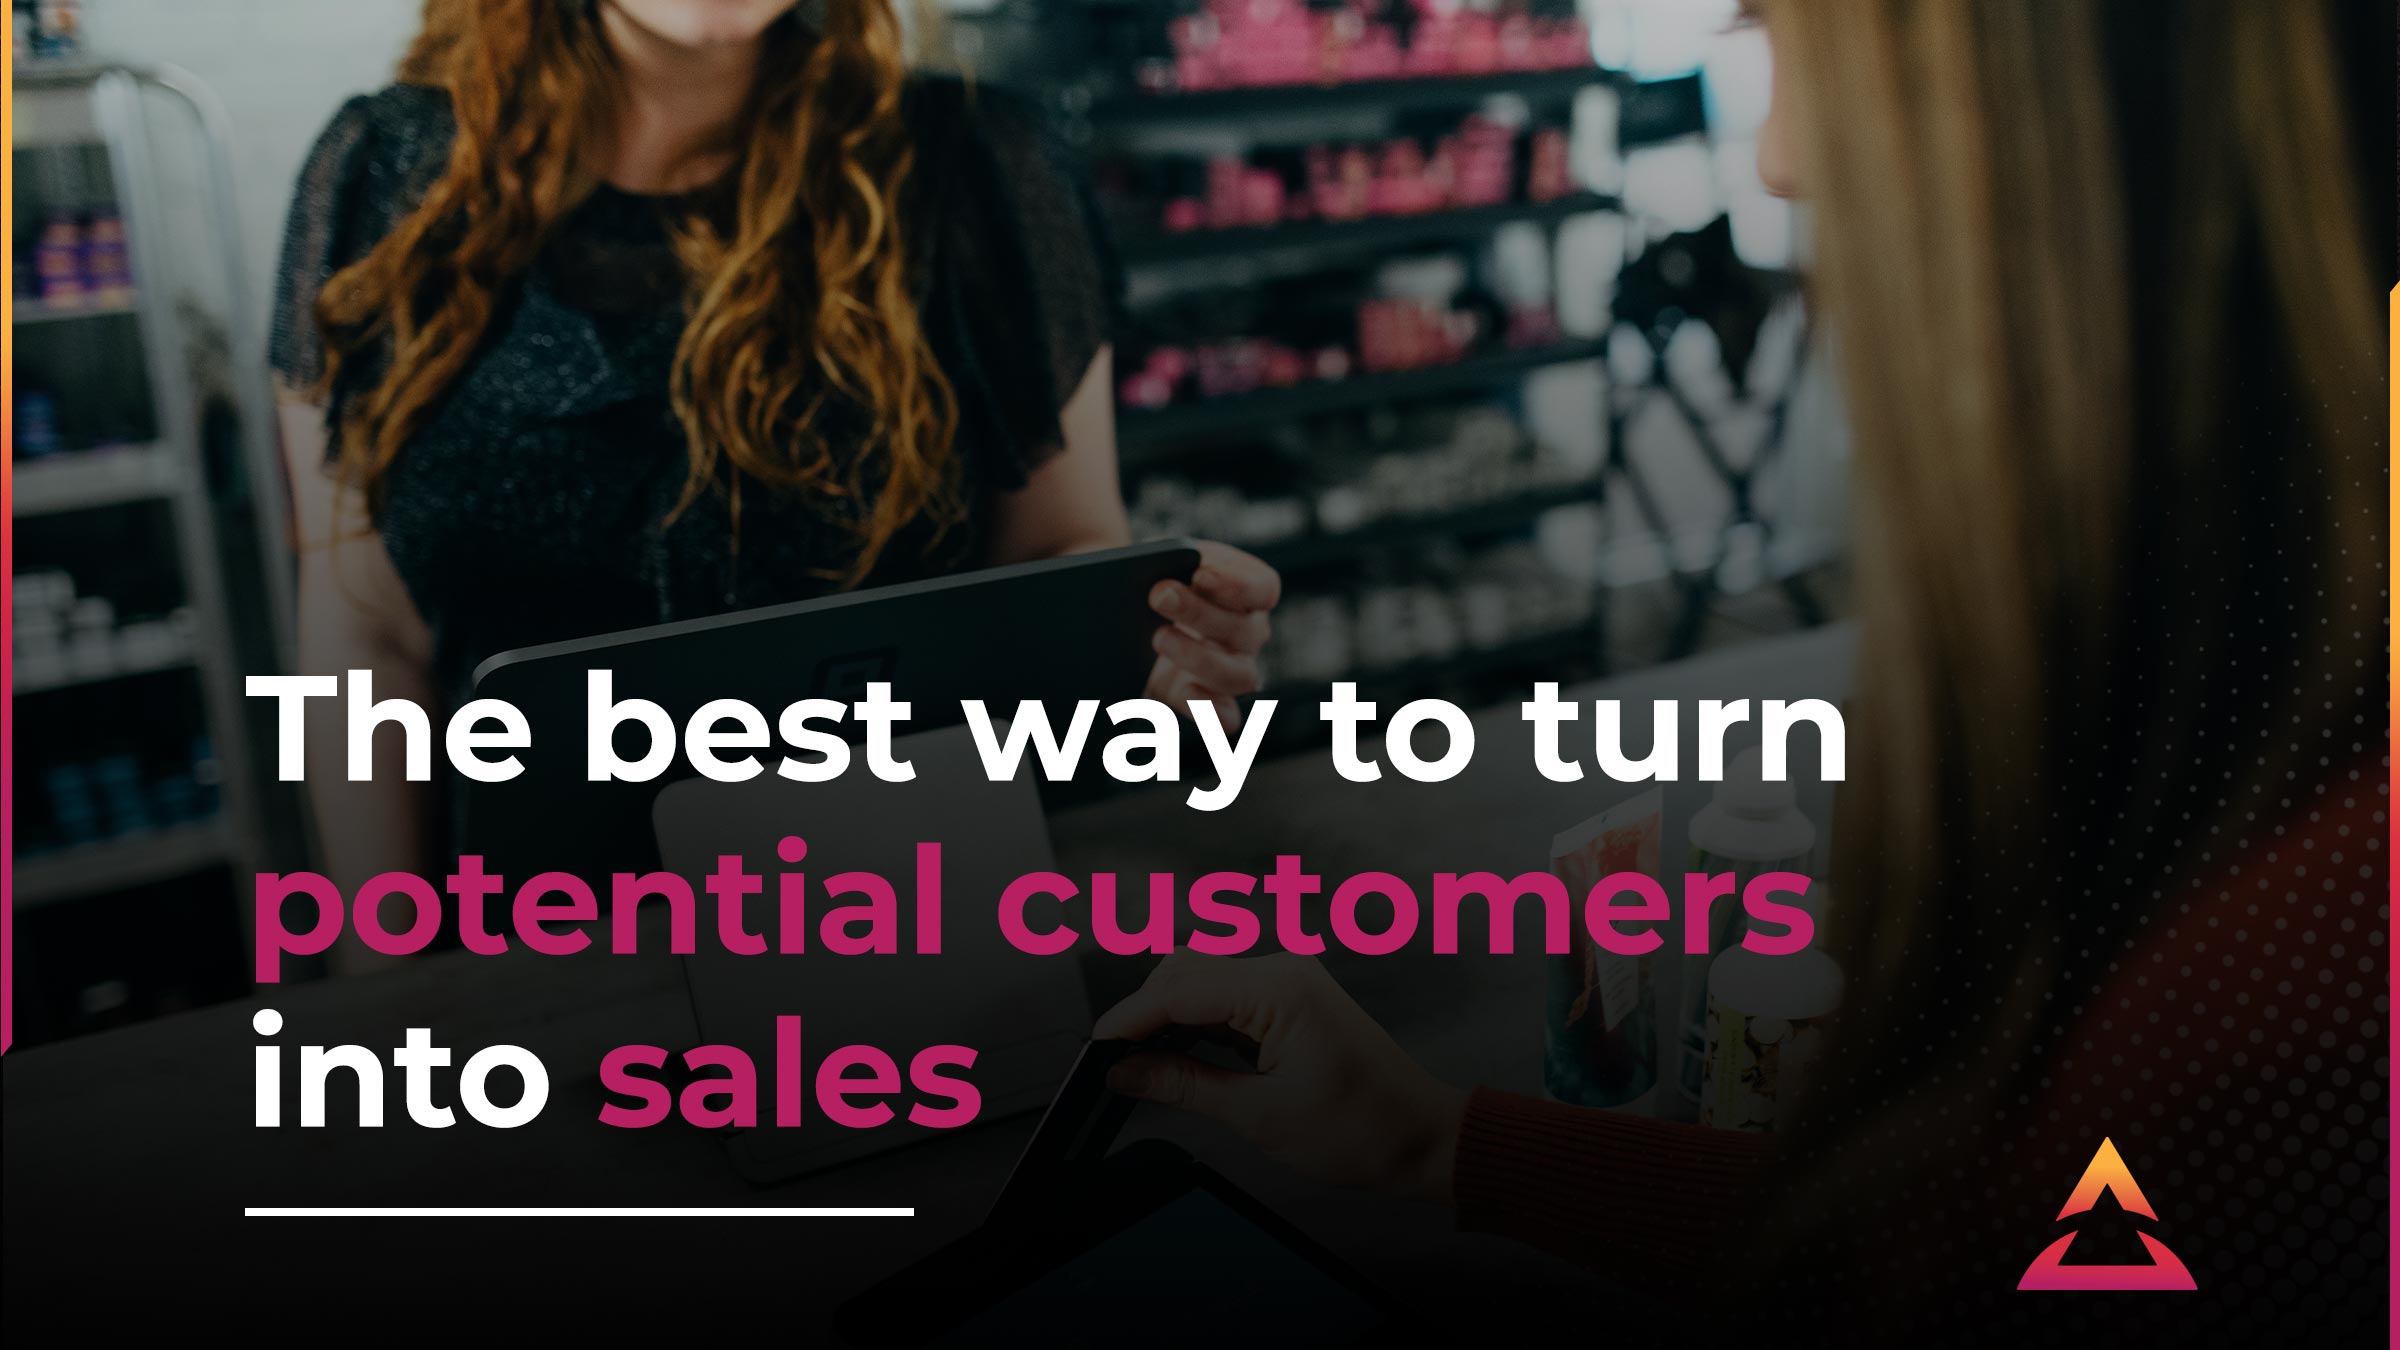 Here’s Why You Need A Sales Funnel